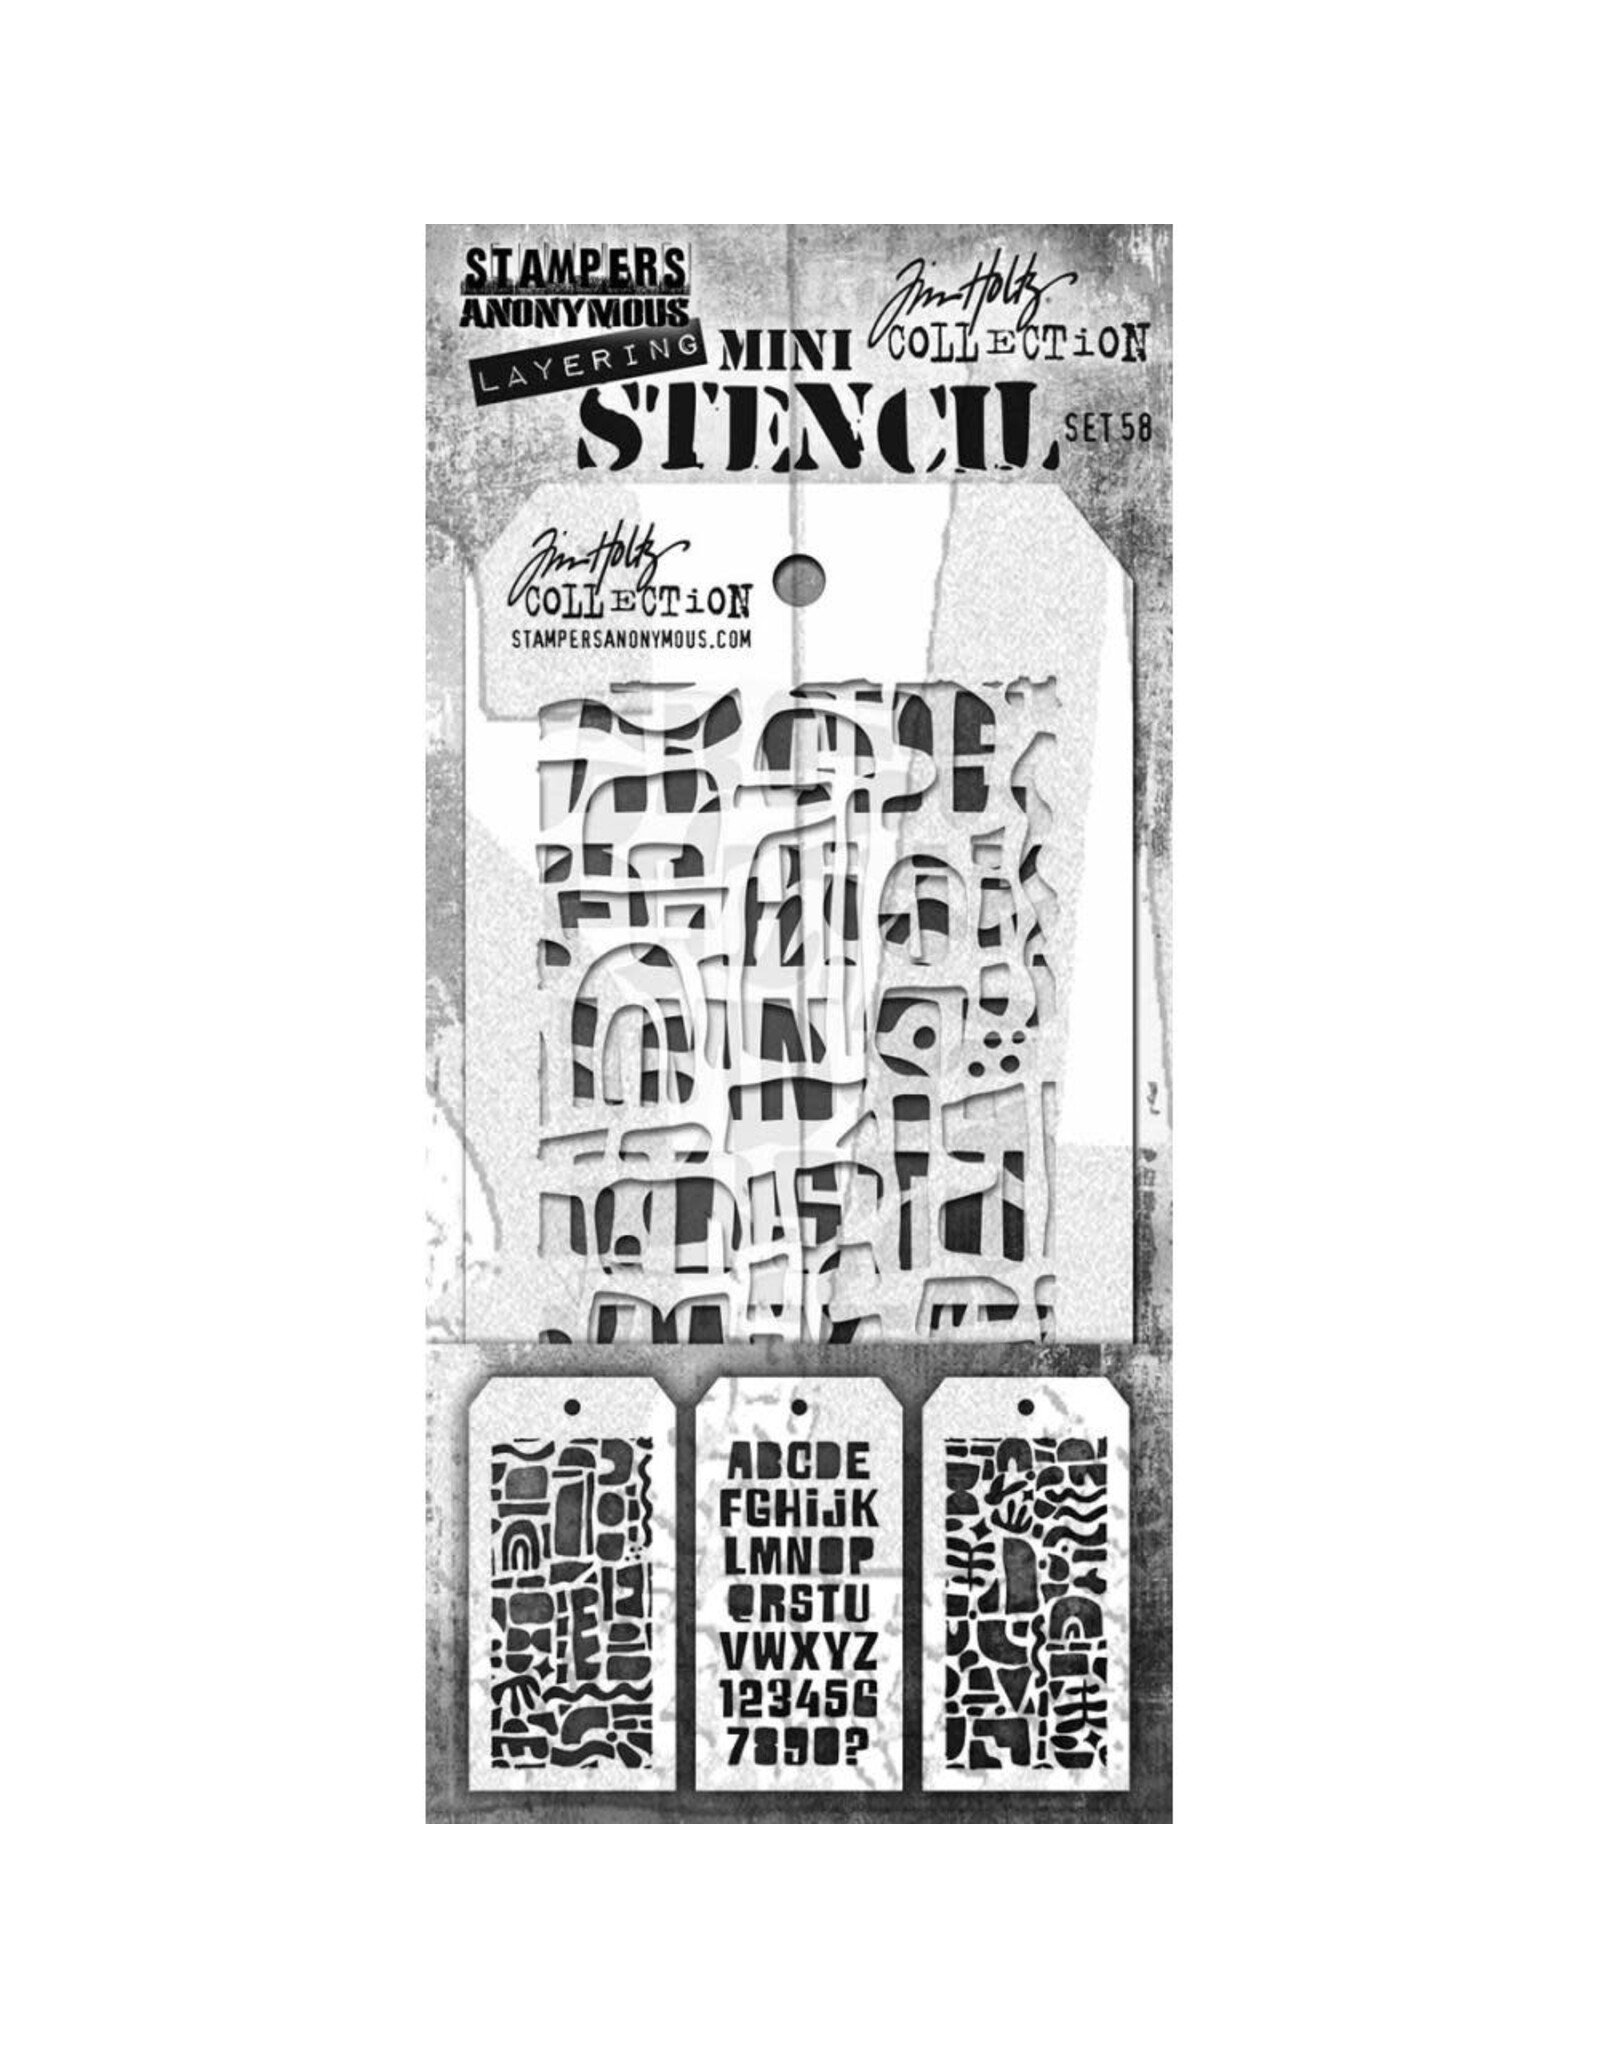 STAMPERS ANONYMOUS STAMPERS ANONYMOUS TIM HOLTZ MINI LAYERING STENCIL SET 58 3PK